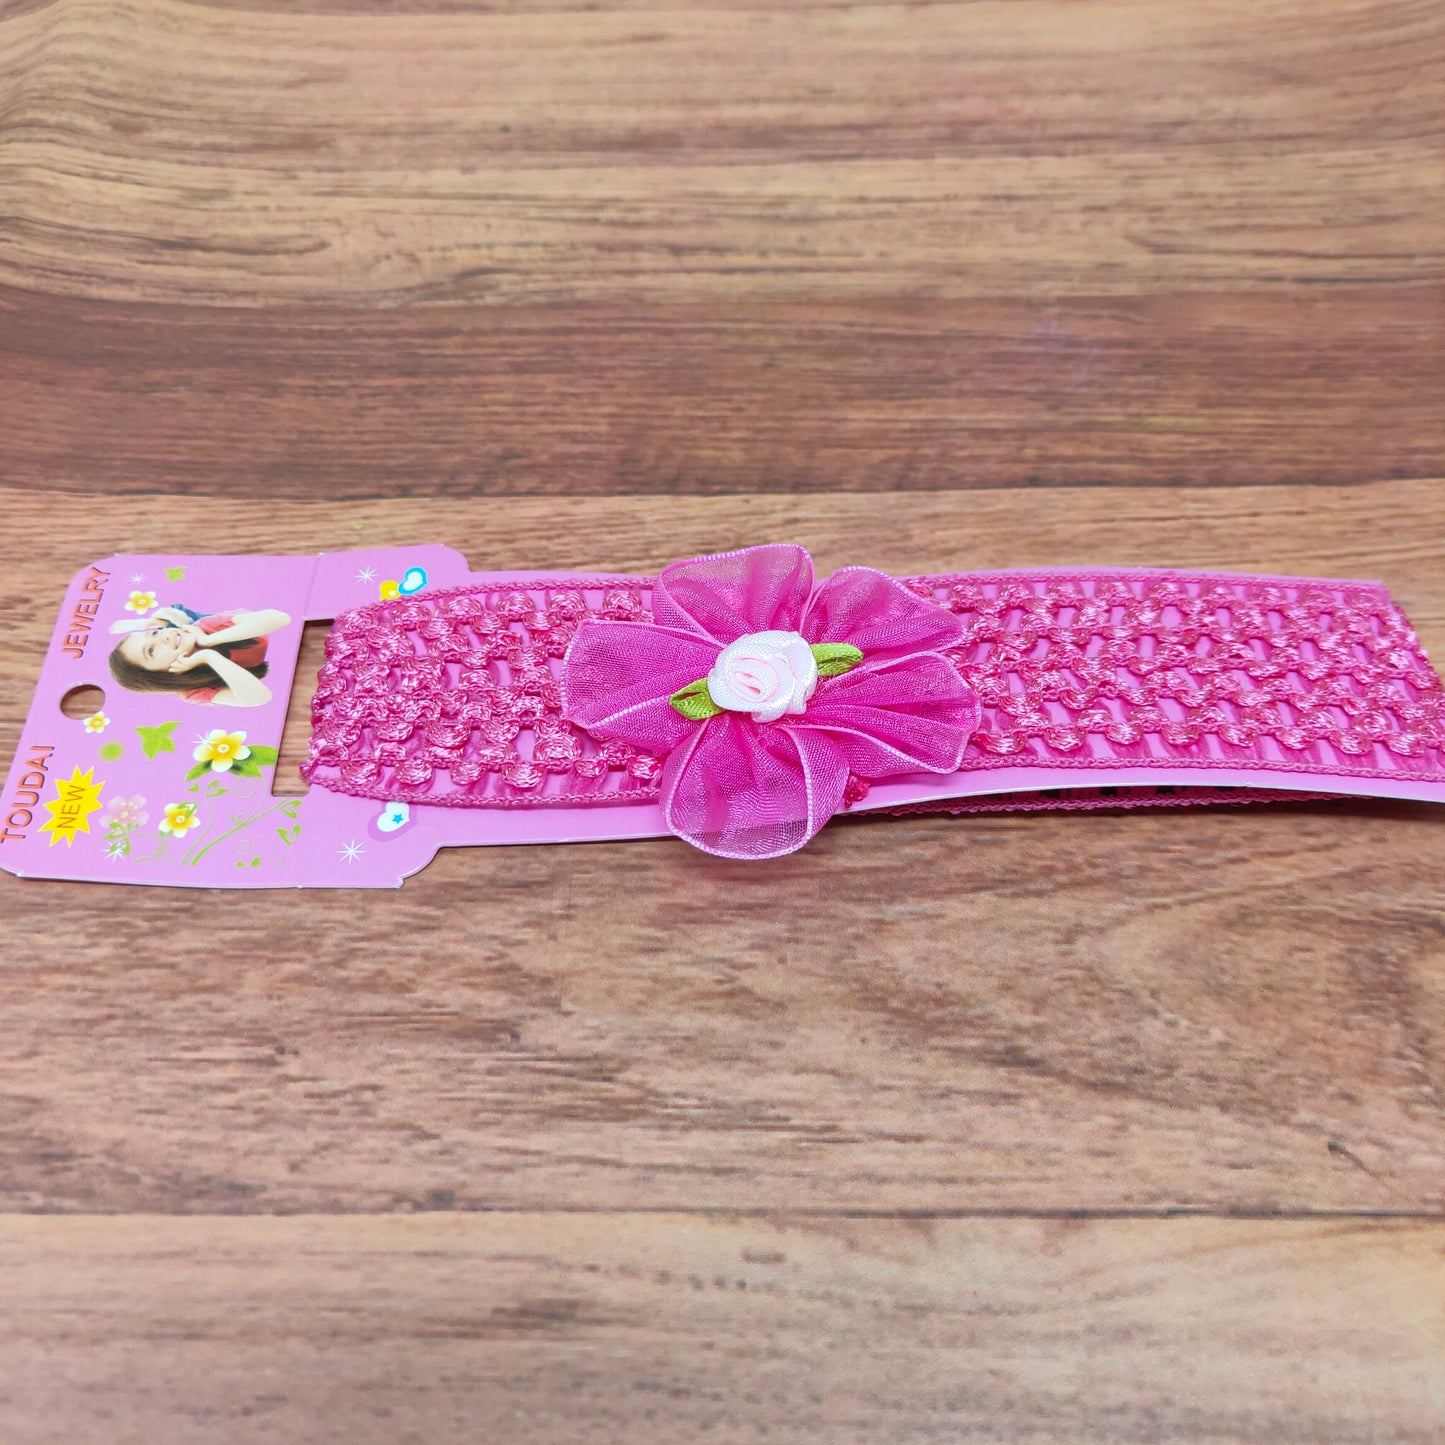 Floral Soft Stretchy Headbands for Baby Girls and Newborn (17-26 Baby Headband)